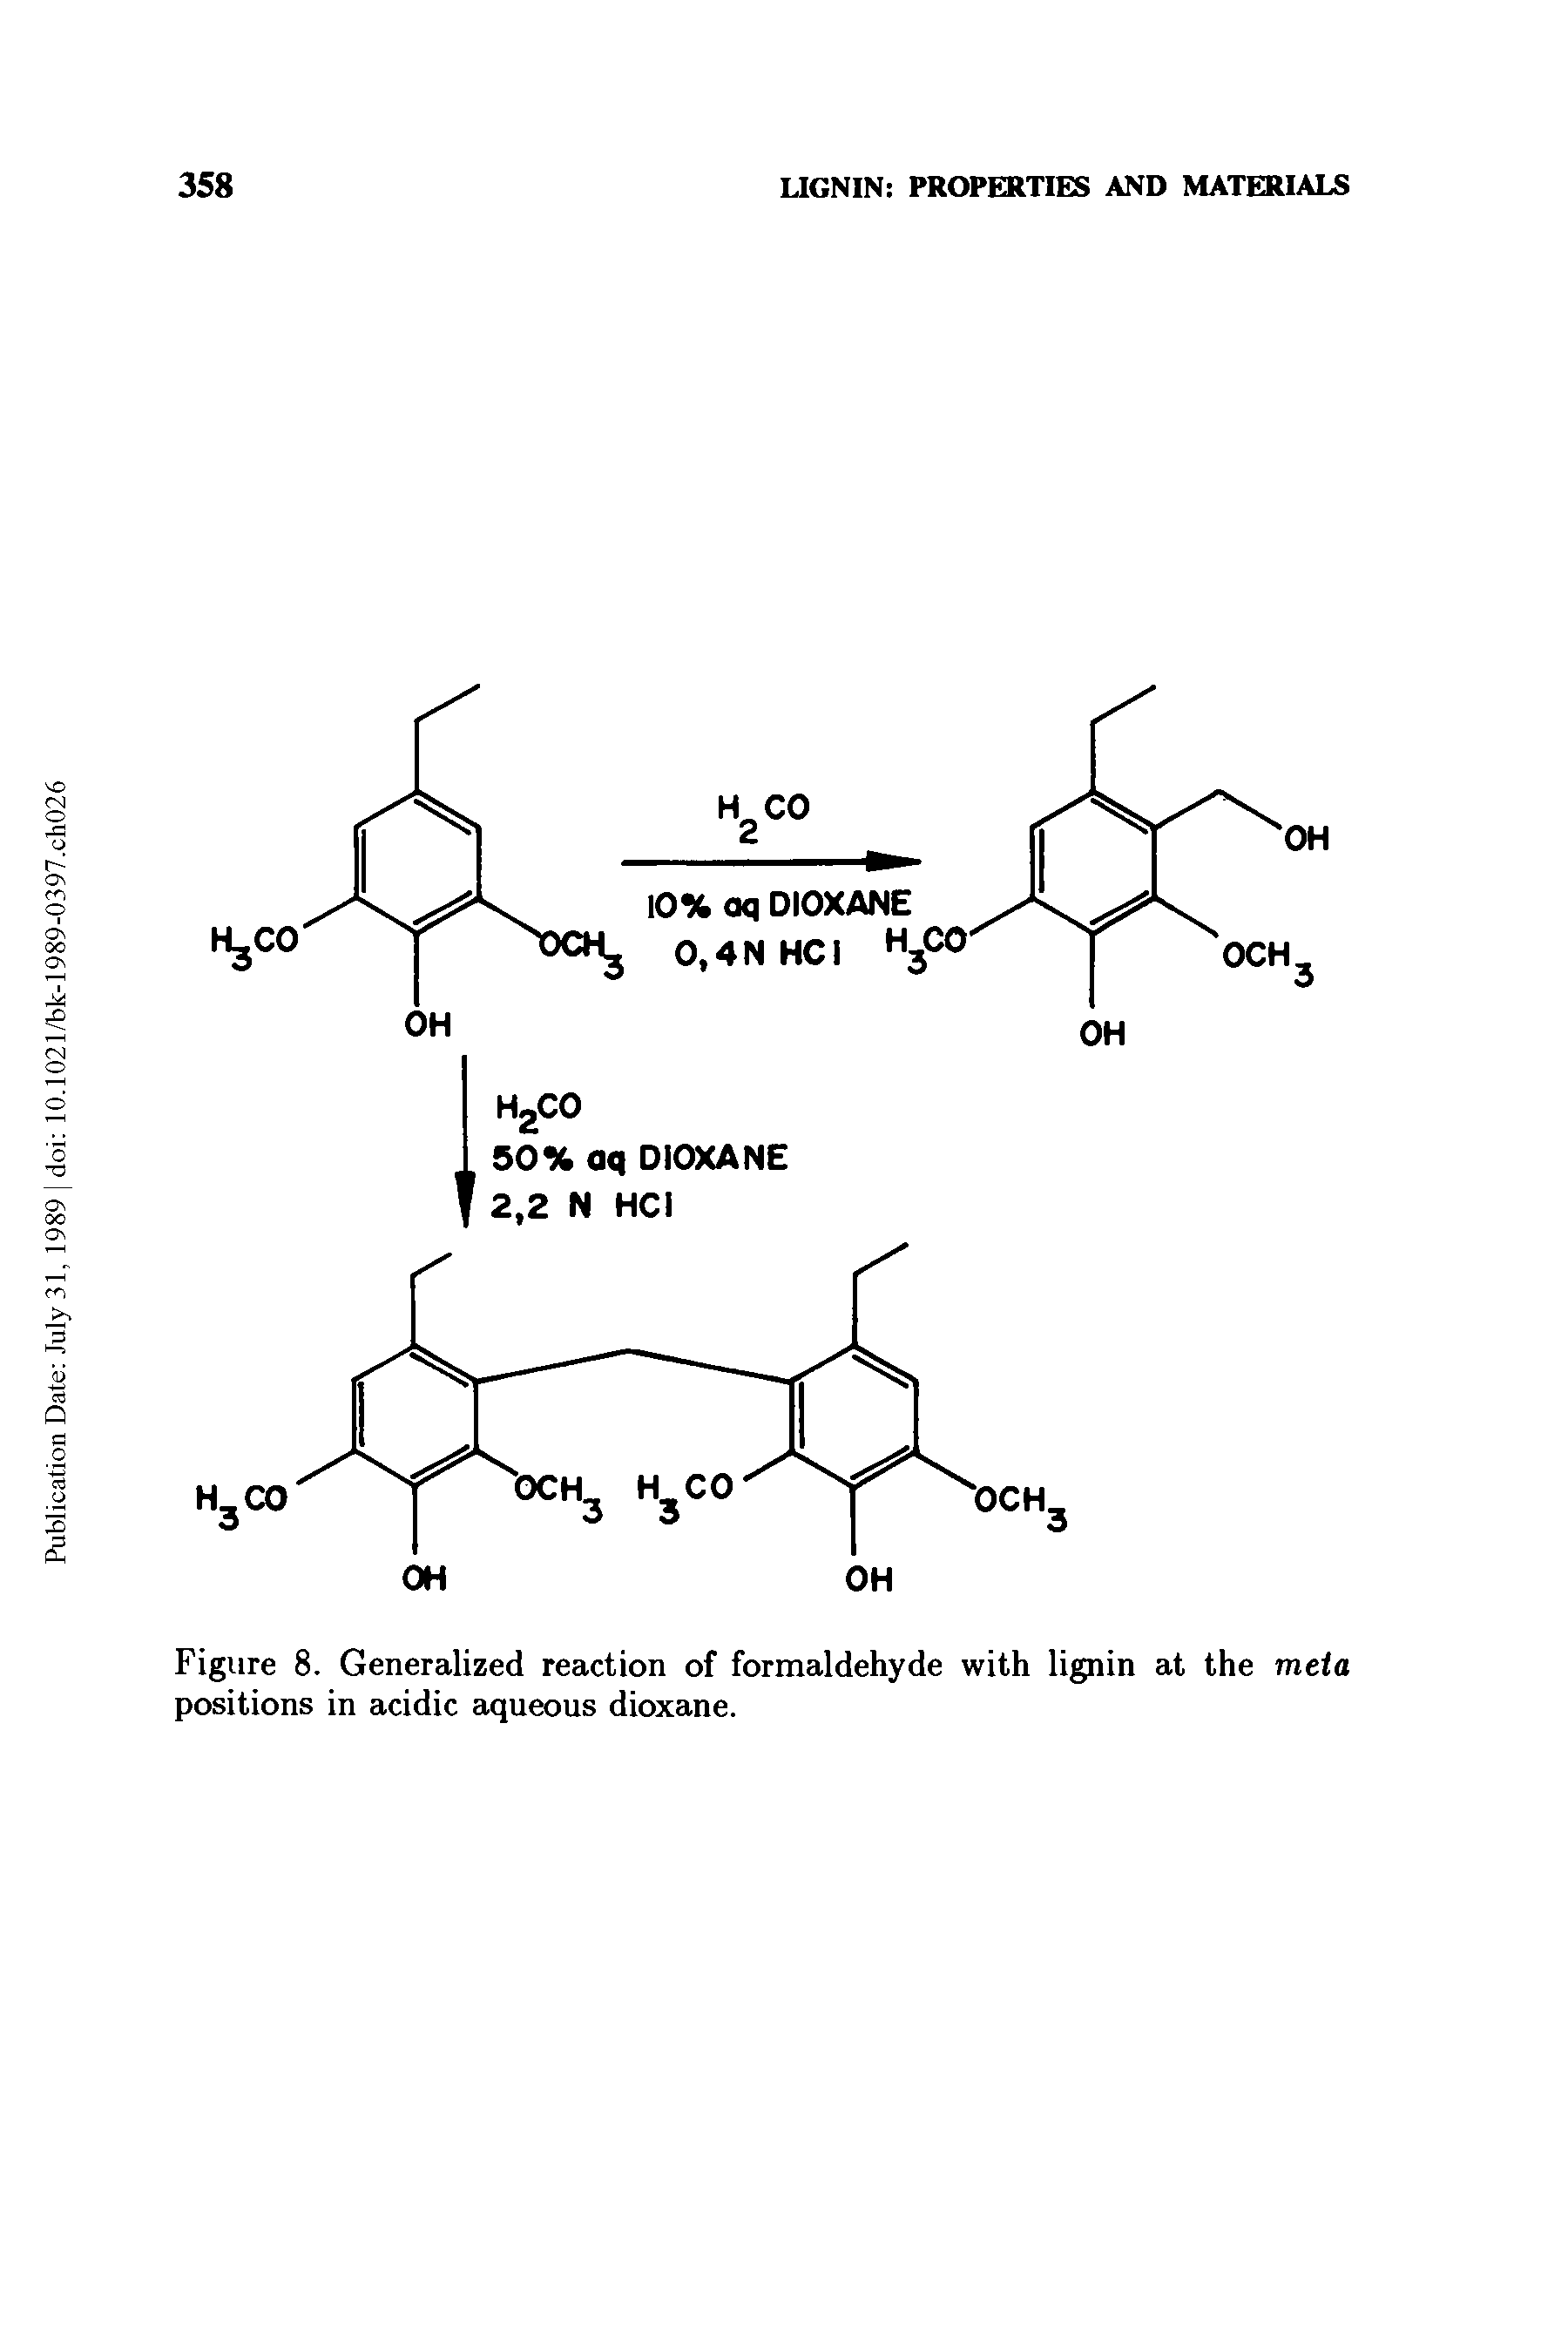 Figure 8. Generalized reaction of formaldehyde with lignin at the meta positions in acidic aqueous dioxane.